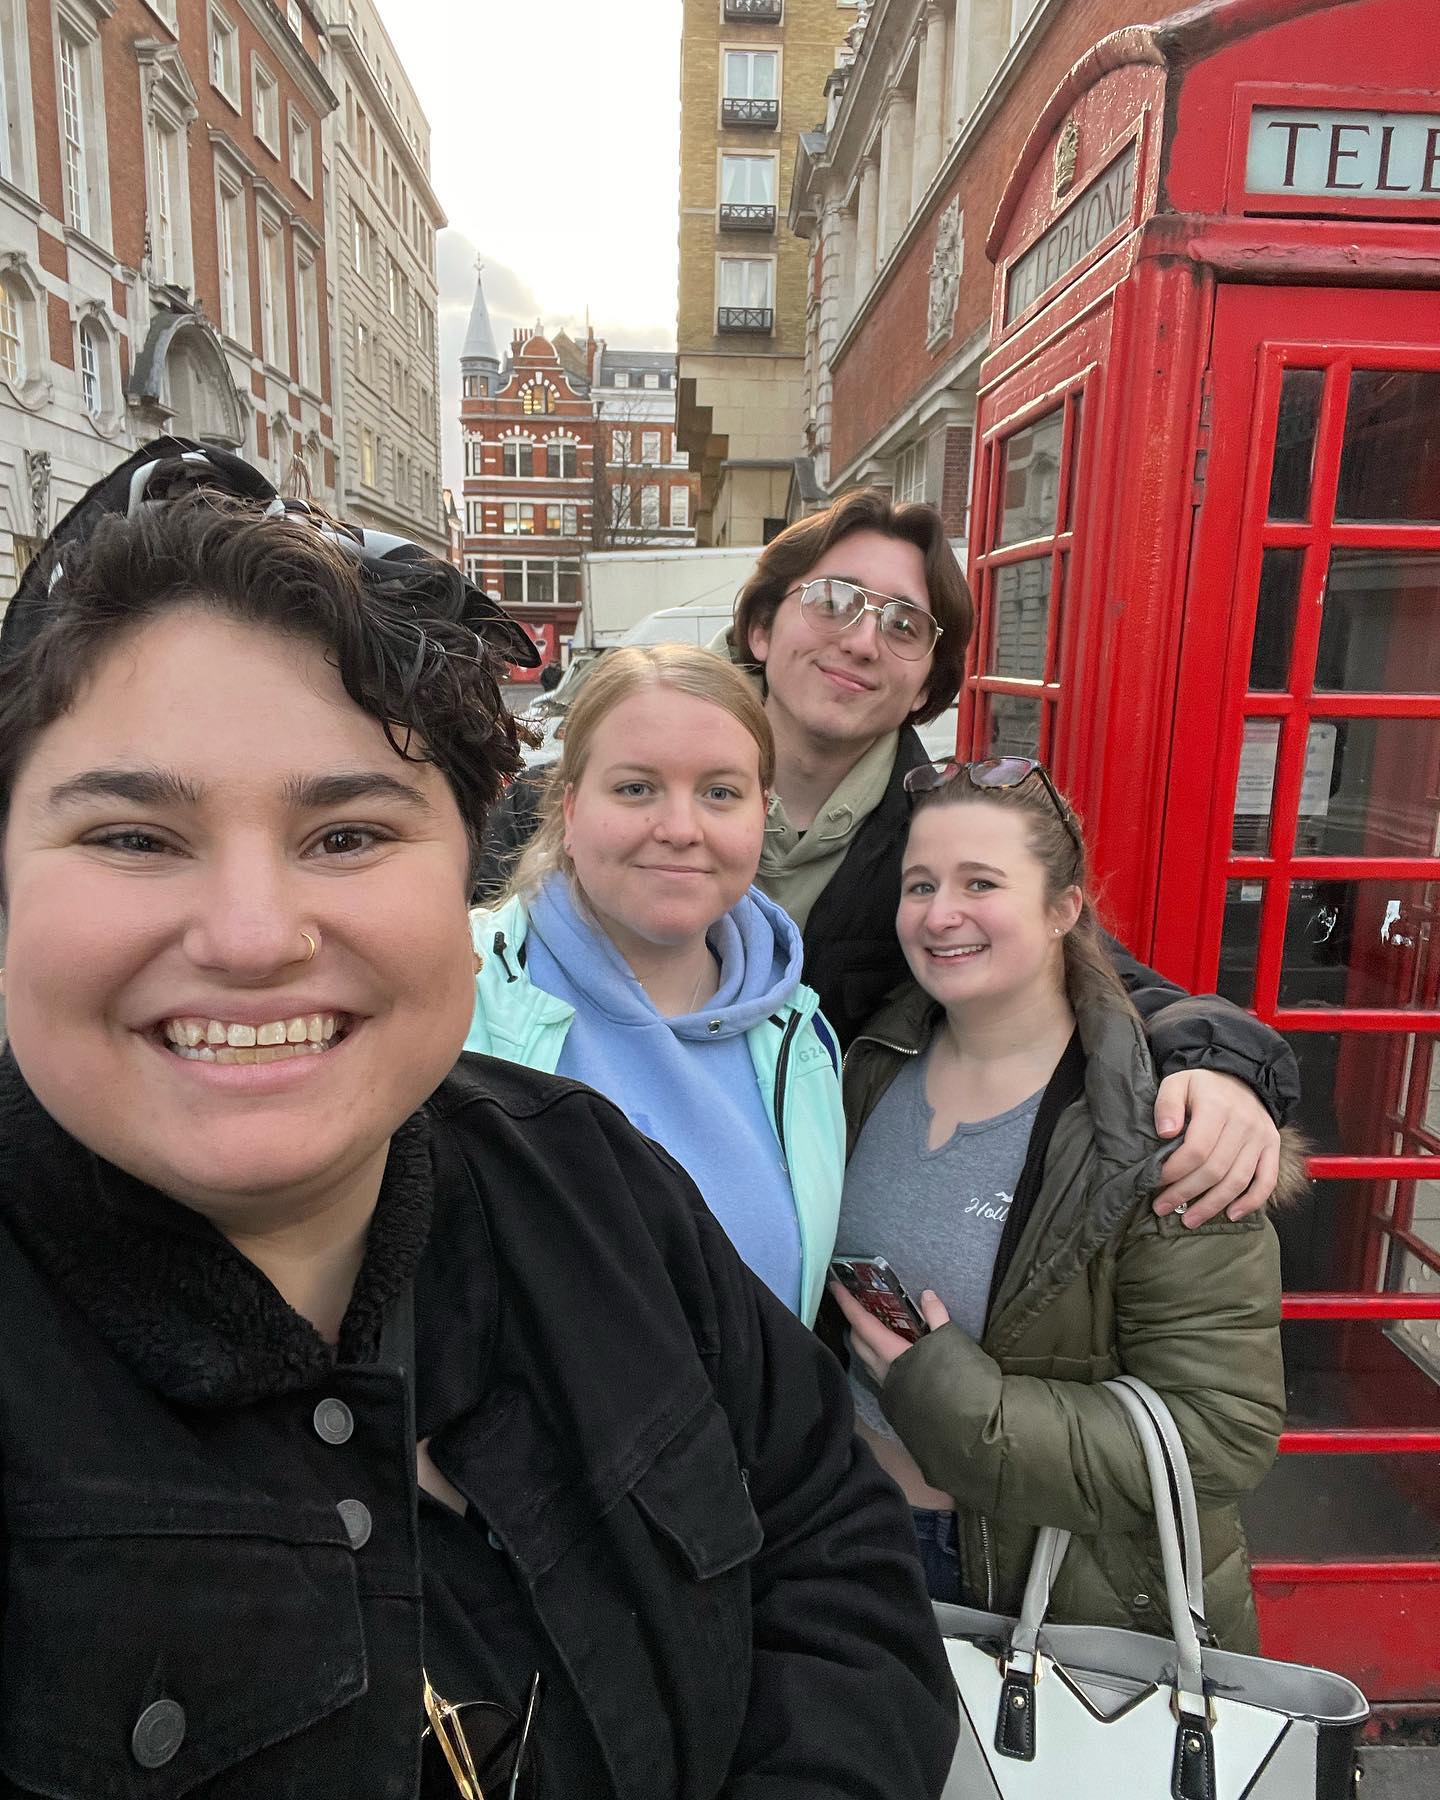 Hello from London! Sarah met up with some of our 2022 staff members today and is getting ready for part two of the Camp America hiring fair tomorrow!